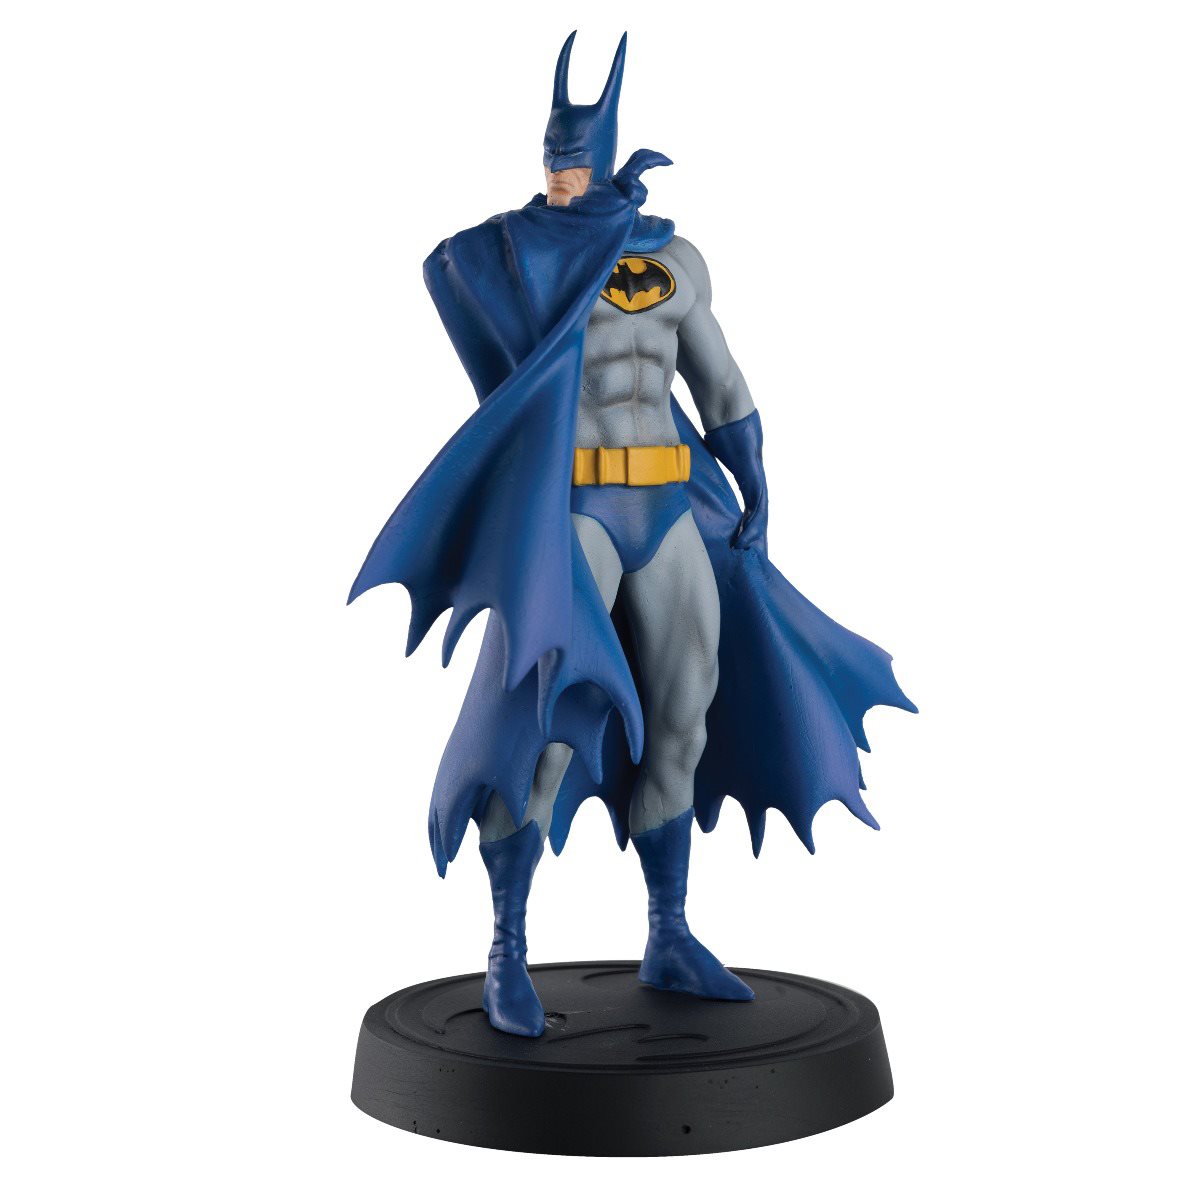 90's Batman and More are Back with Eaglemoss Statues